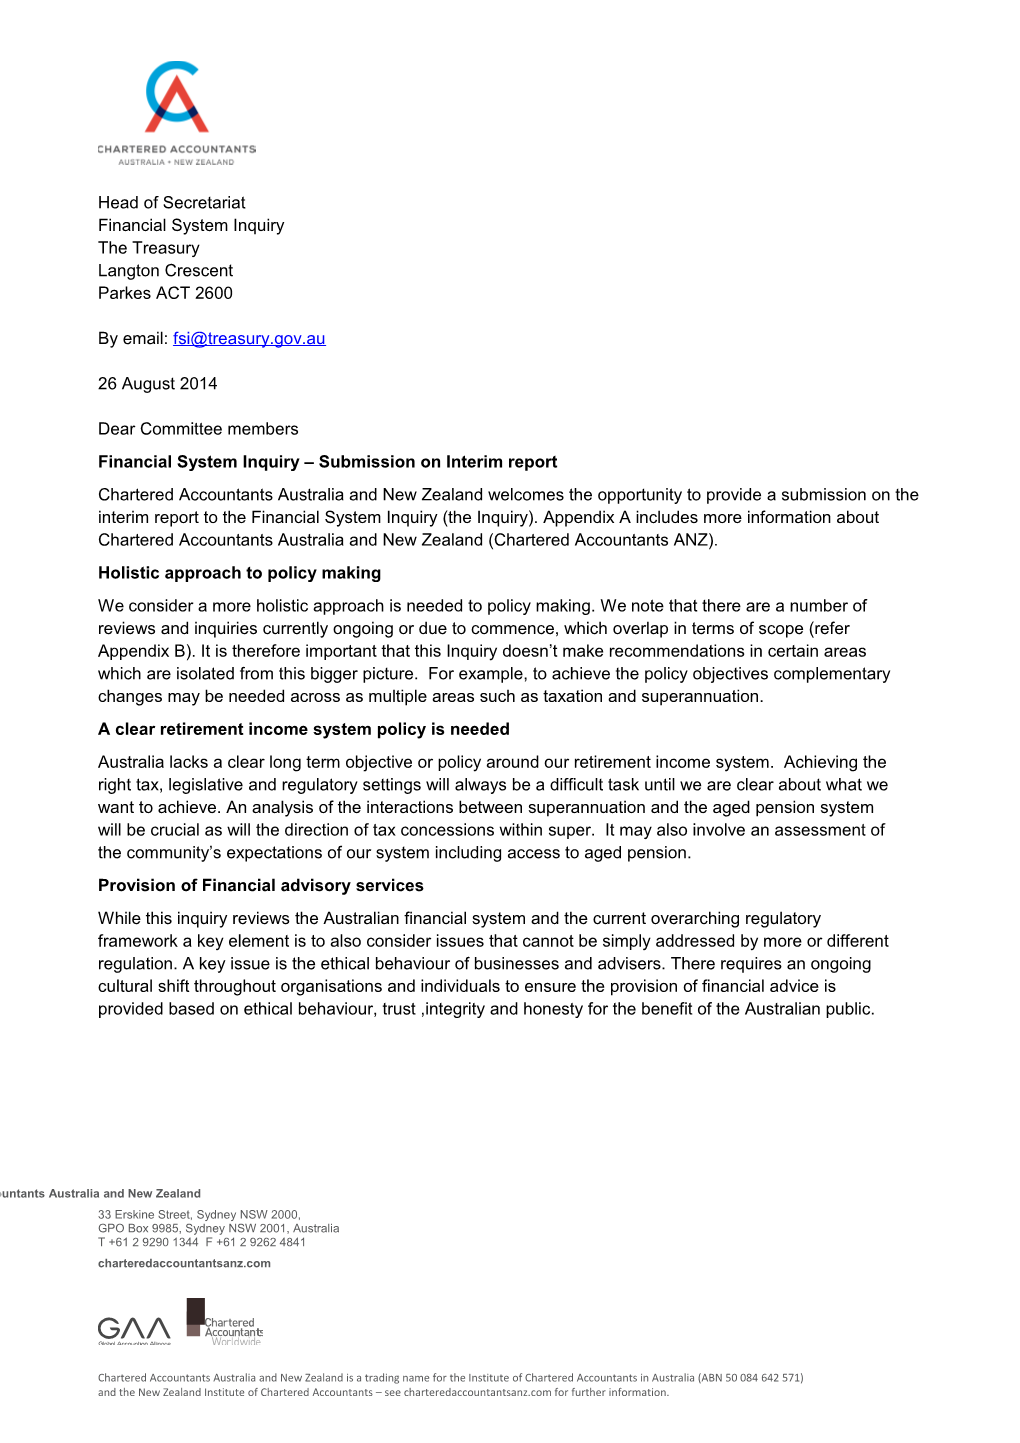 Chartered Accountants Australia and New Zealand - Submission to the Financial System Inquiry